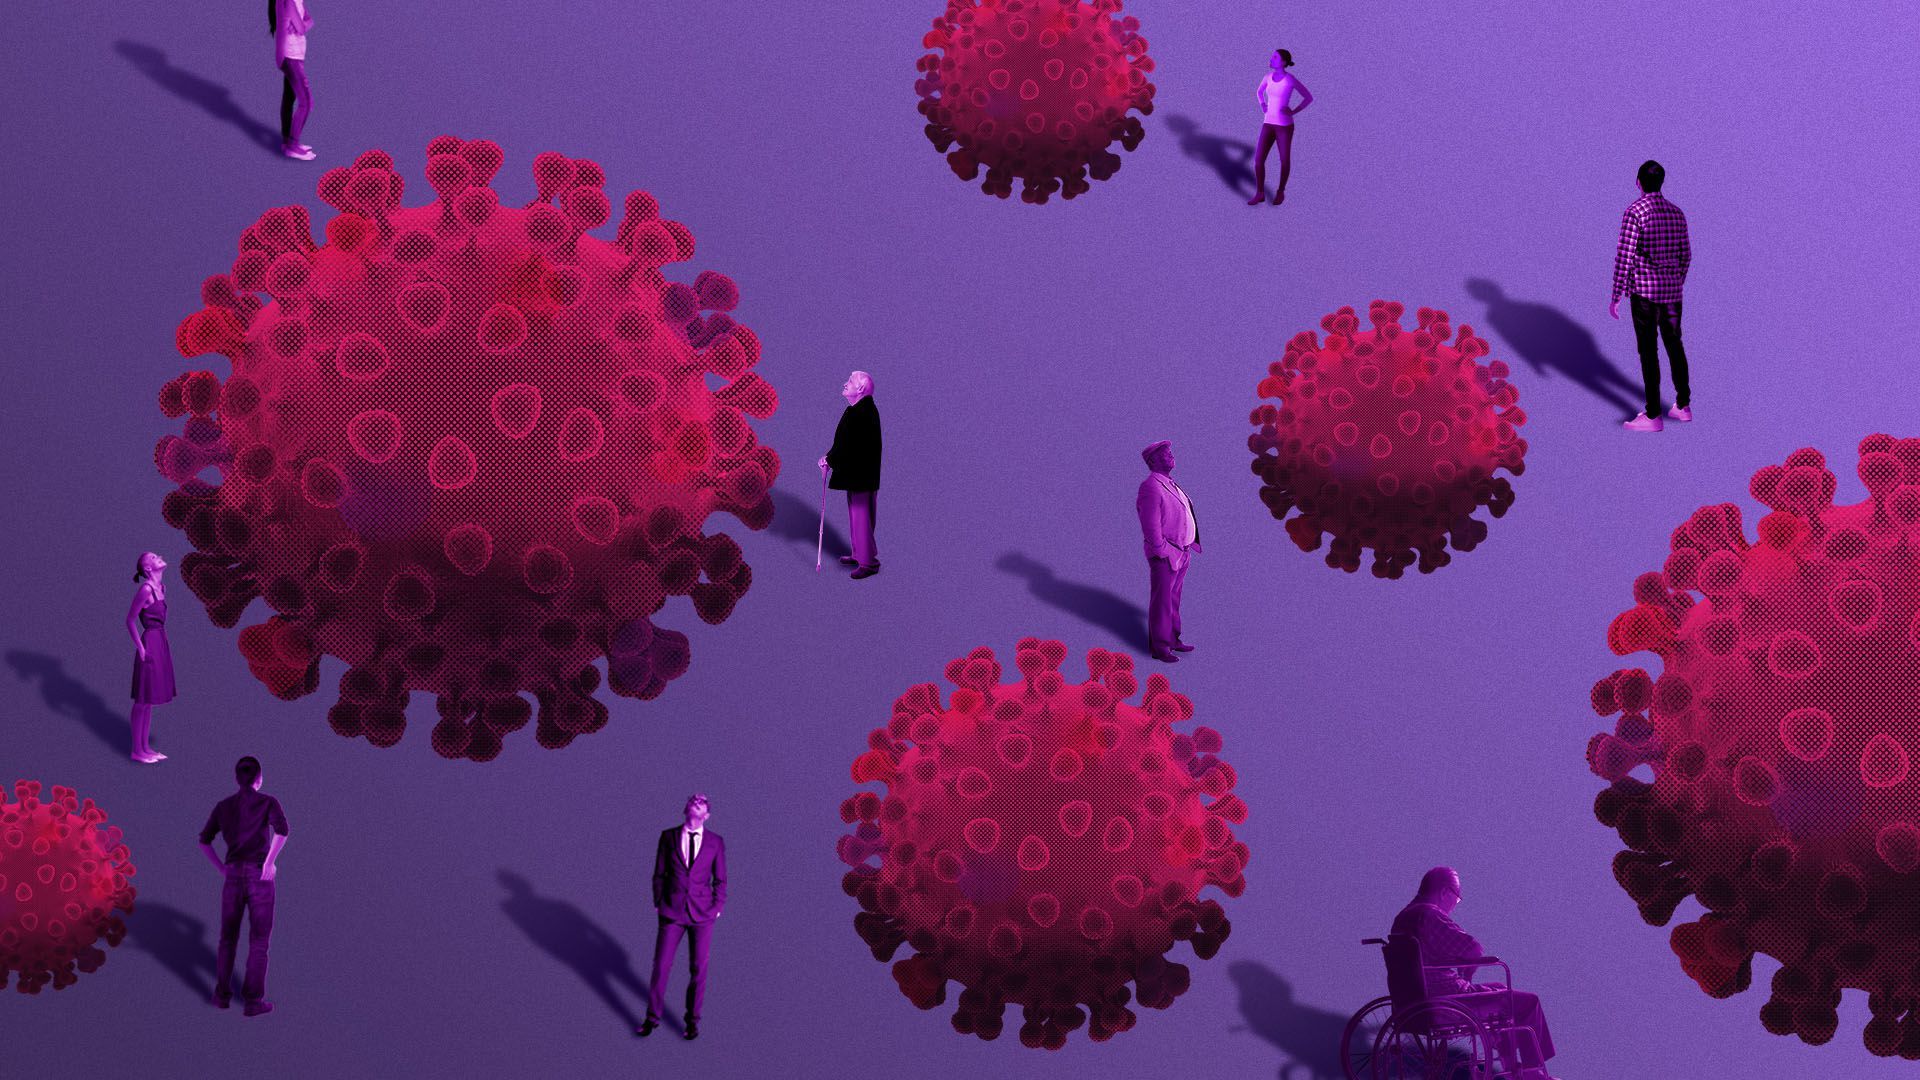 Illustration of people looking up at large floating viruses